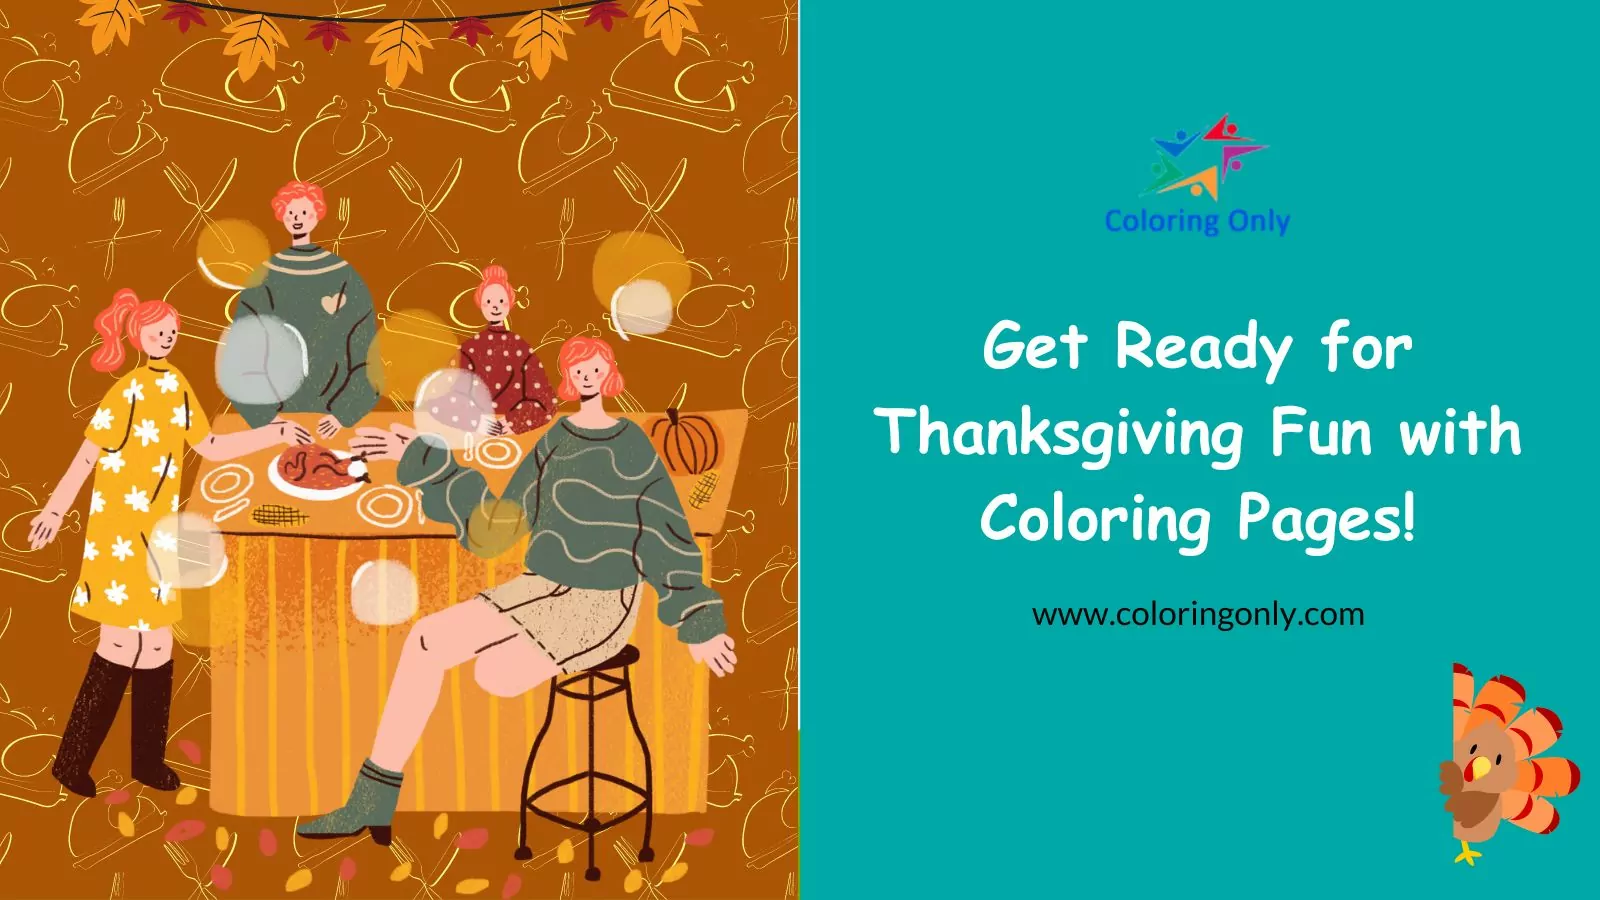 Get Ready for Thanksgiving Fun with Coloring Pages!